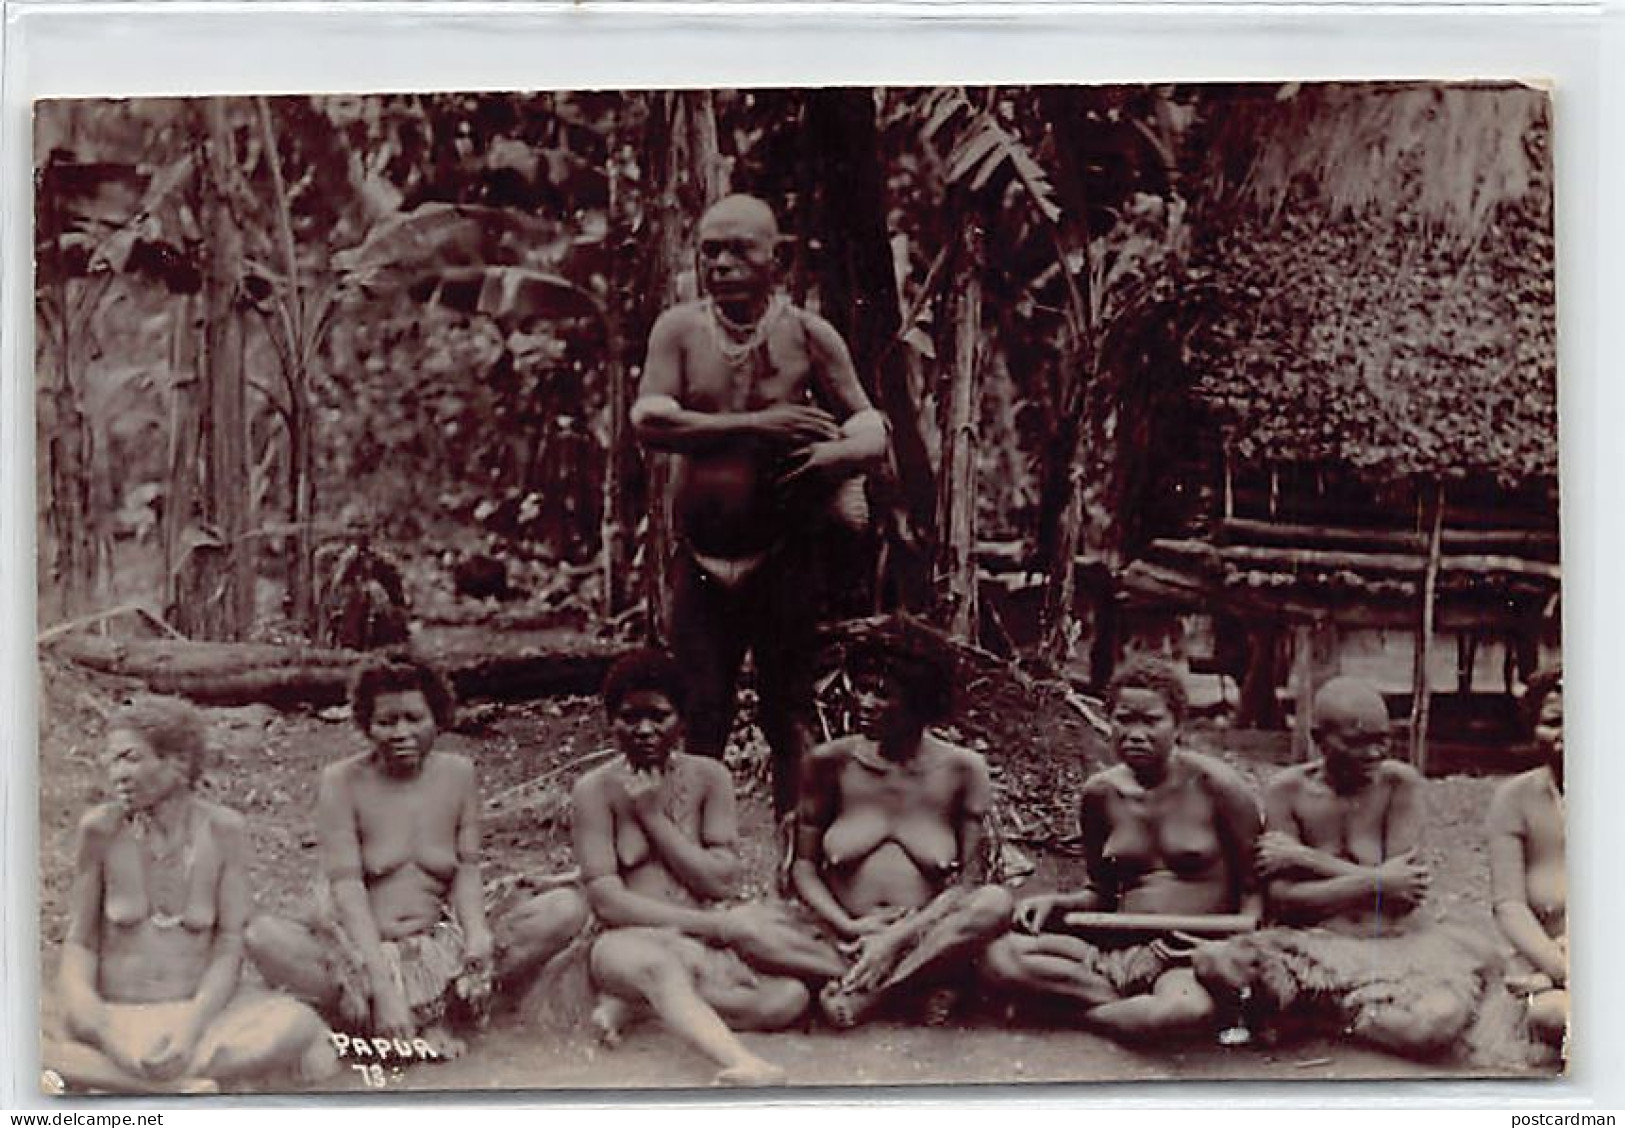 PAPUA NEW GUINEA - Papuan Chief And His Nude Wives - REAL PHOTO - Publ. W. H. Cooper. - Papua Nueva Guinea